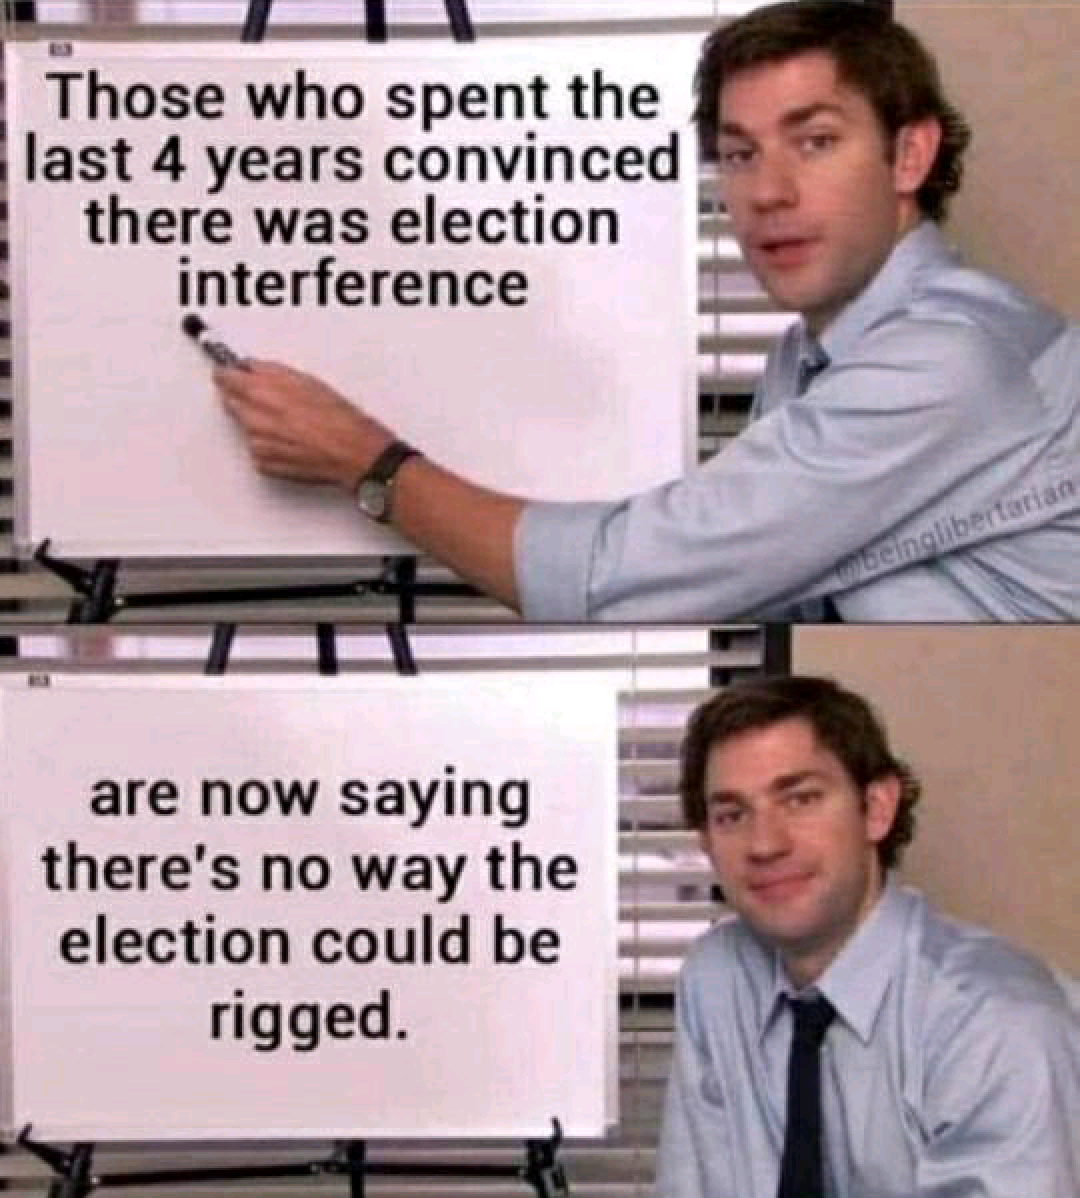 No election interference